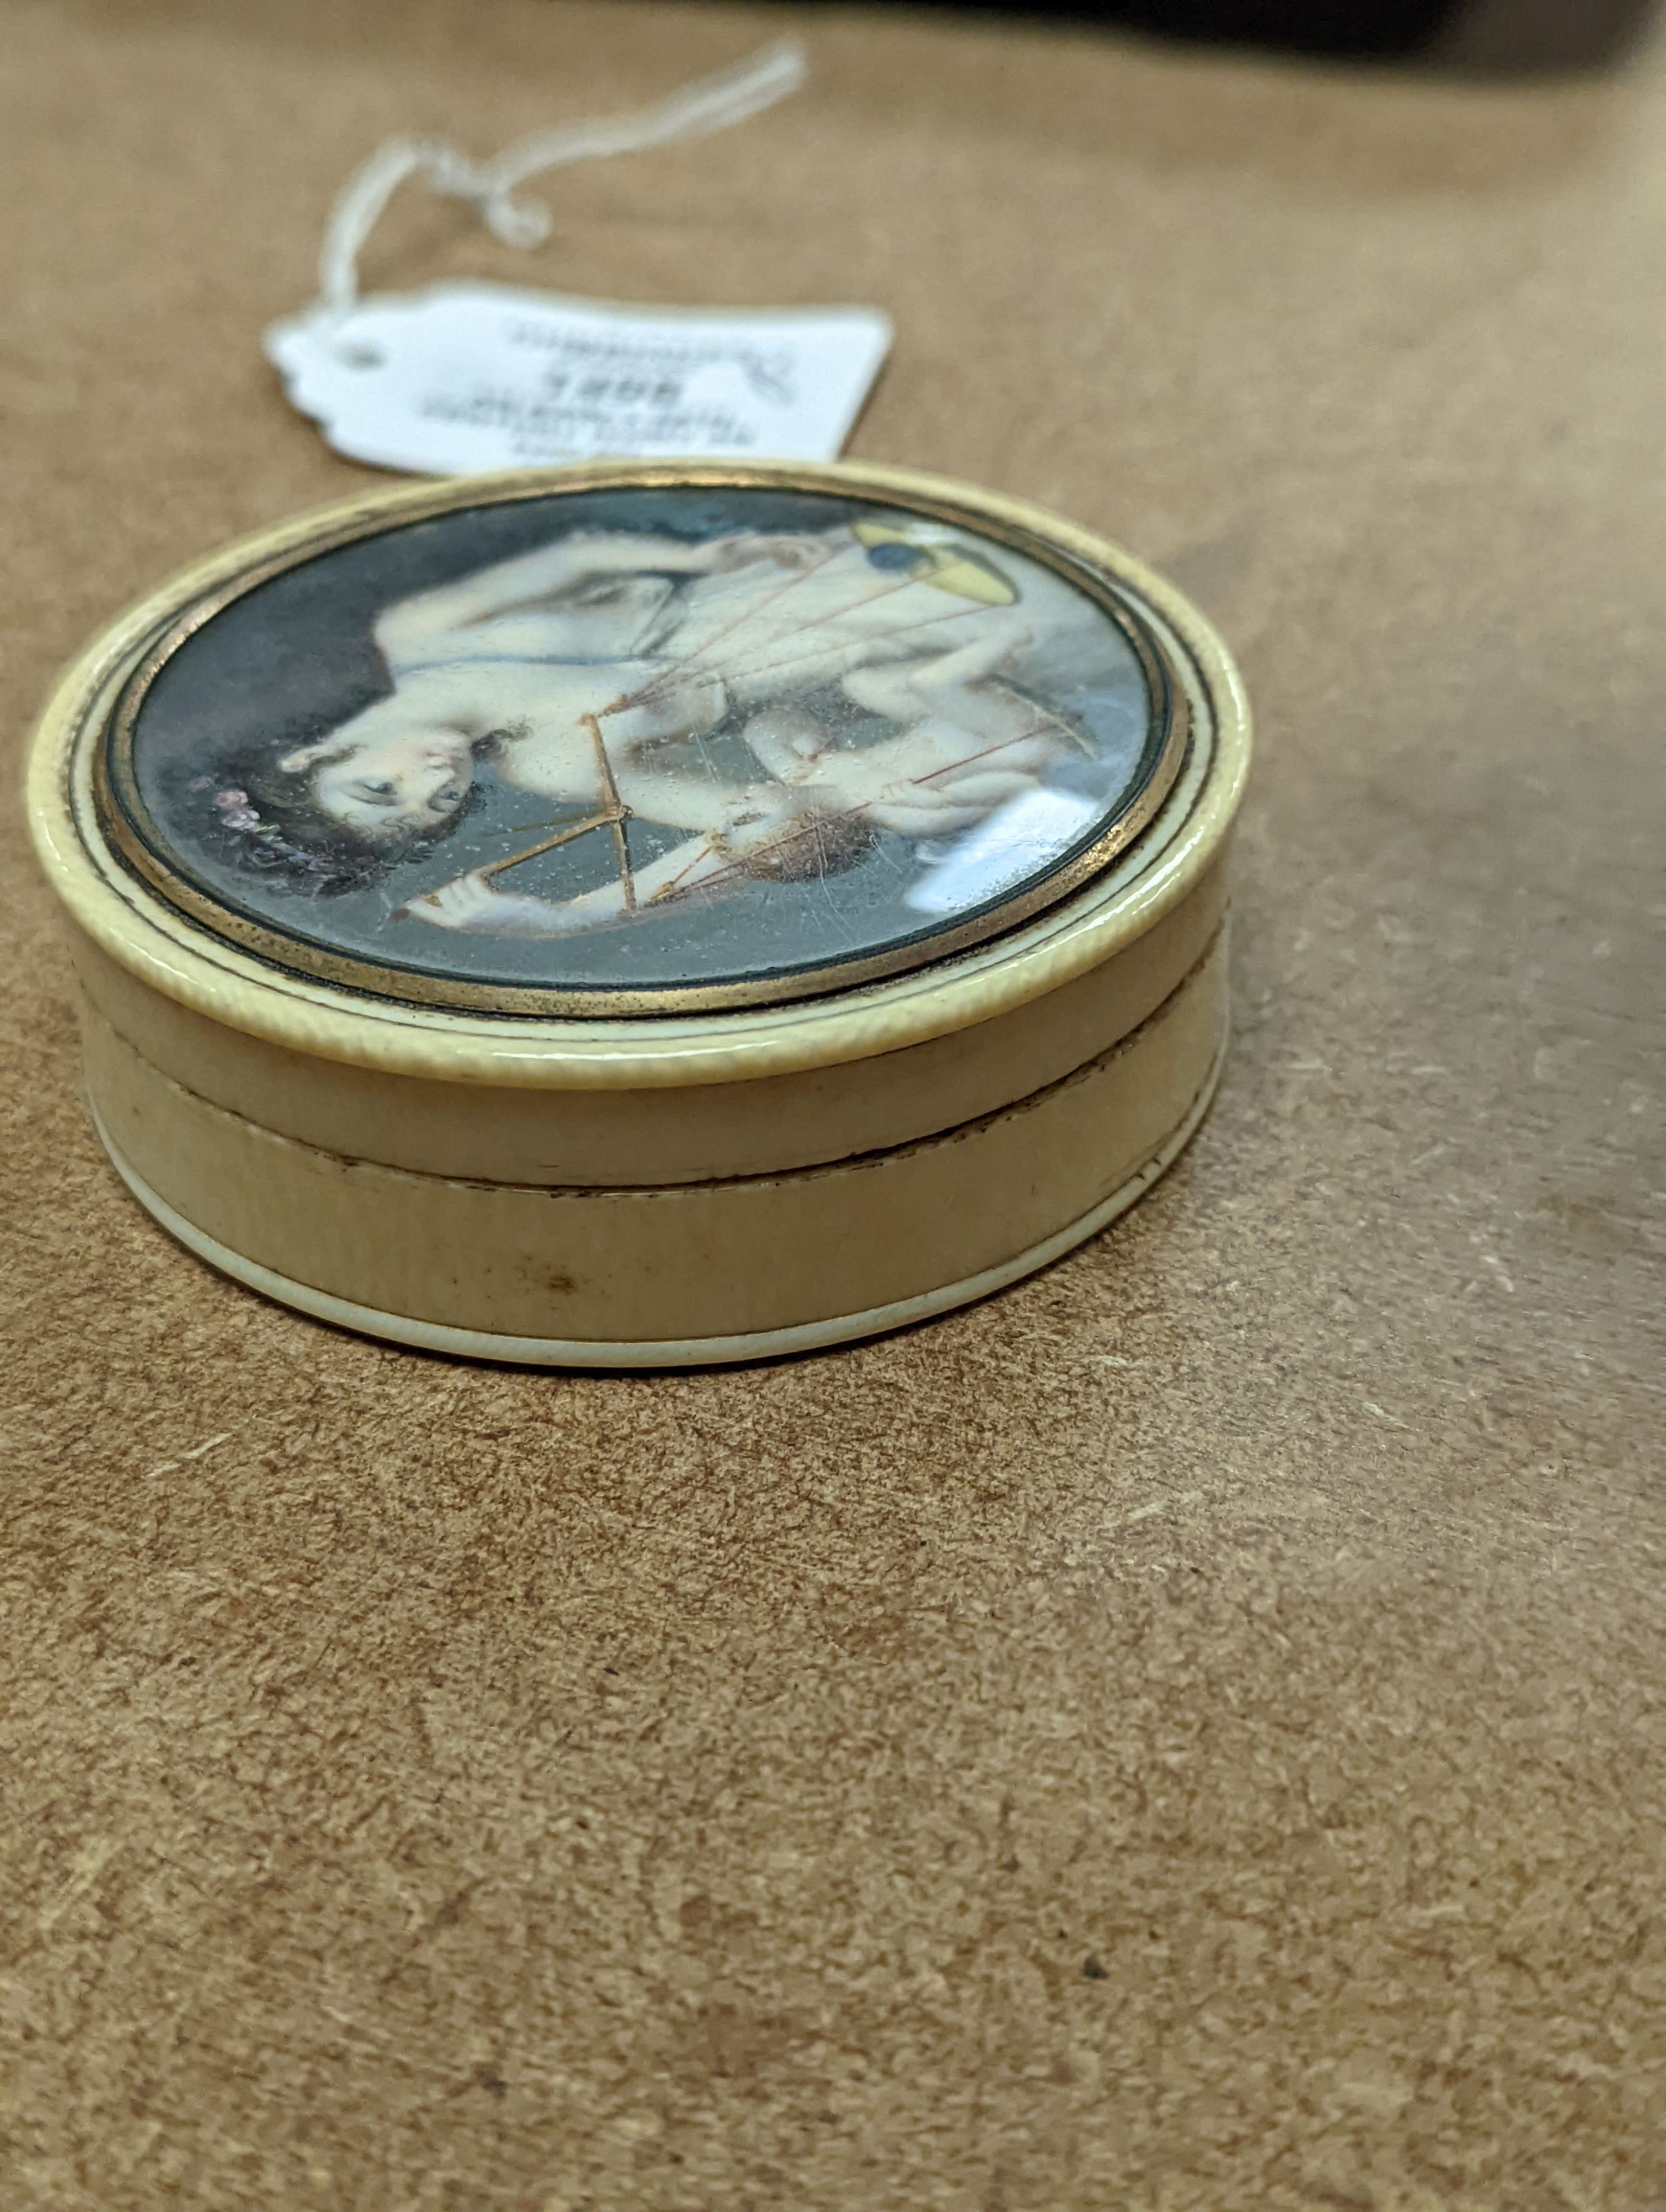 An early 19th century ivory and tortoishell box with inset miniature of Themis to cover, 8cm.